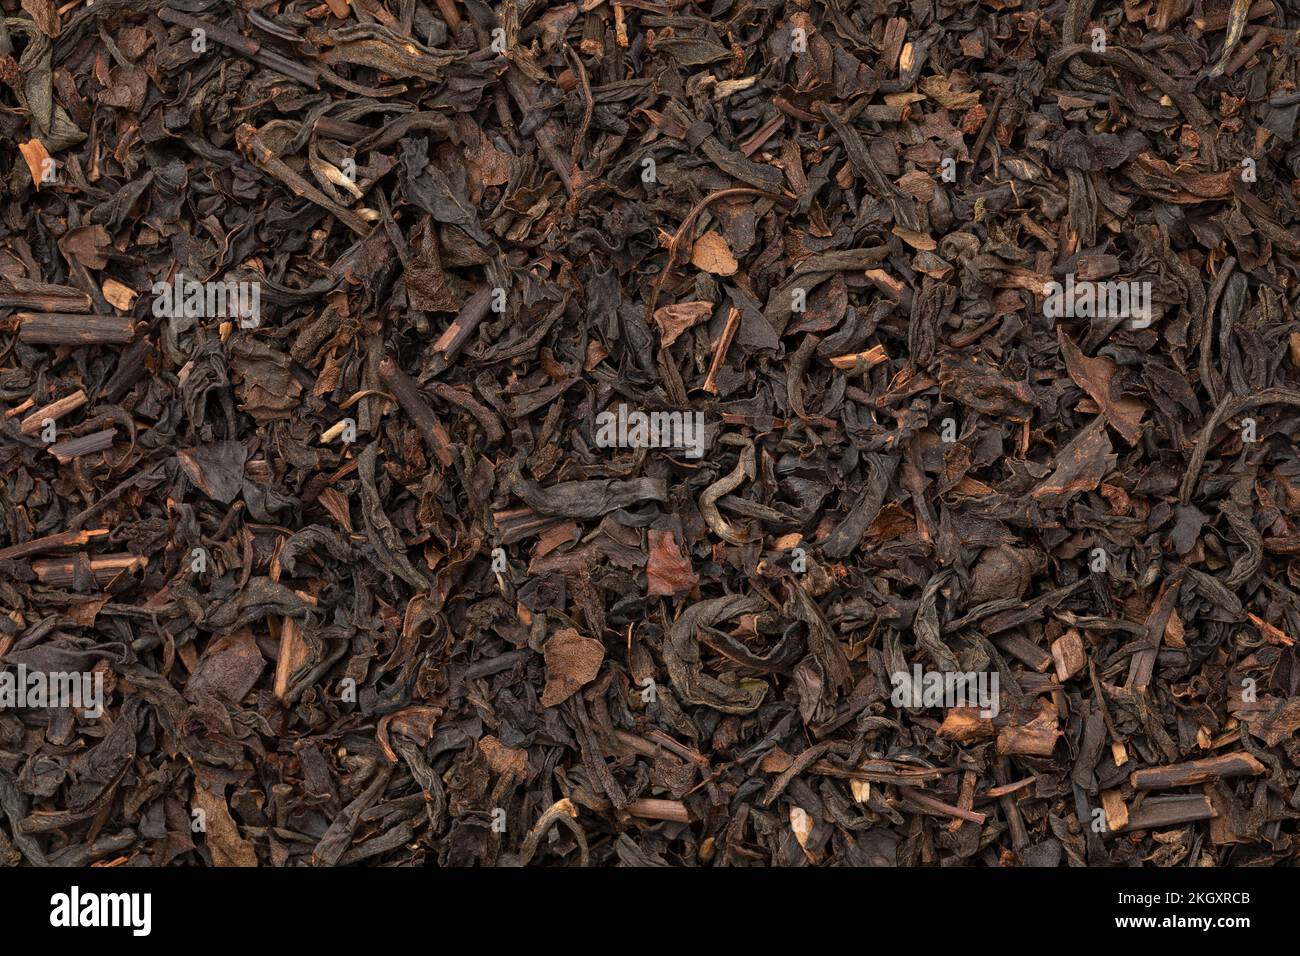 Formosa Oolong dried tea leaves close up full frame as background Stock Photo